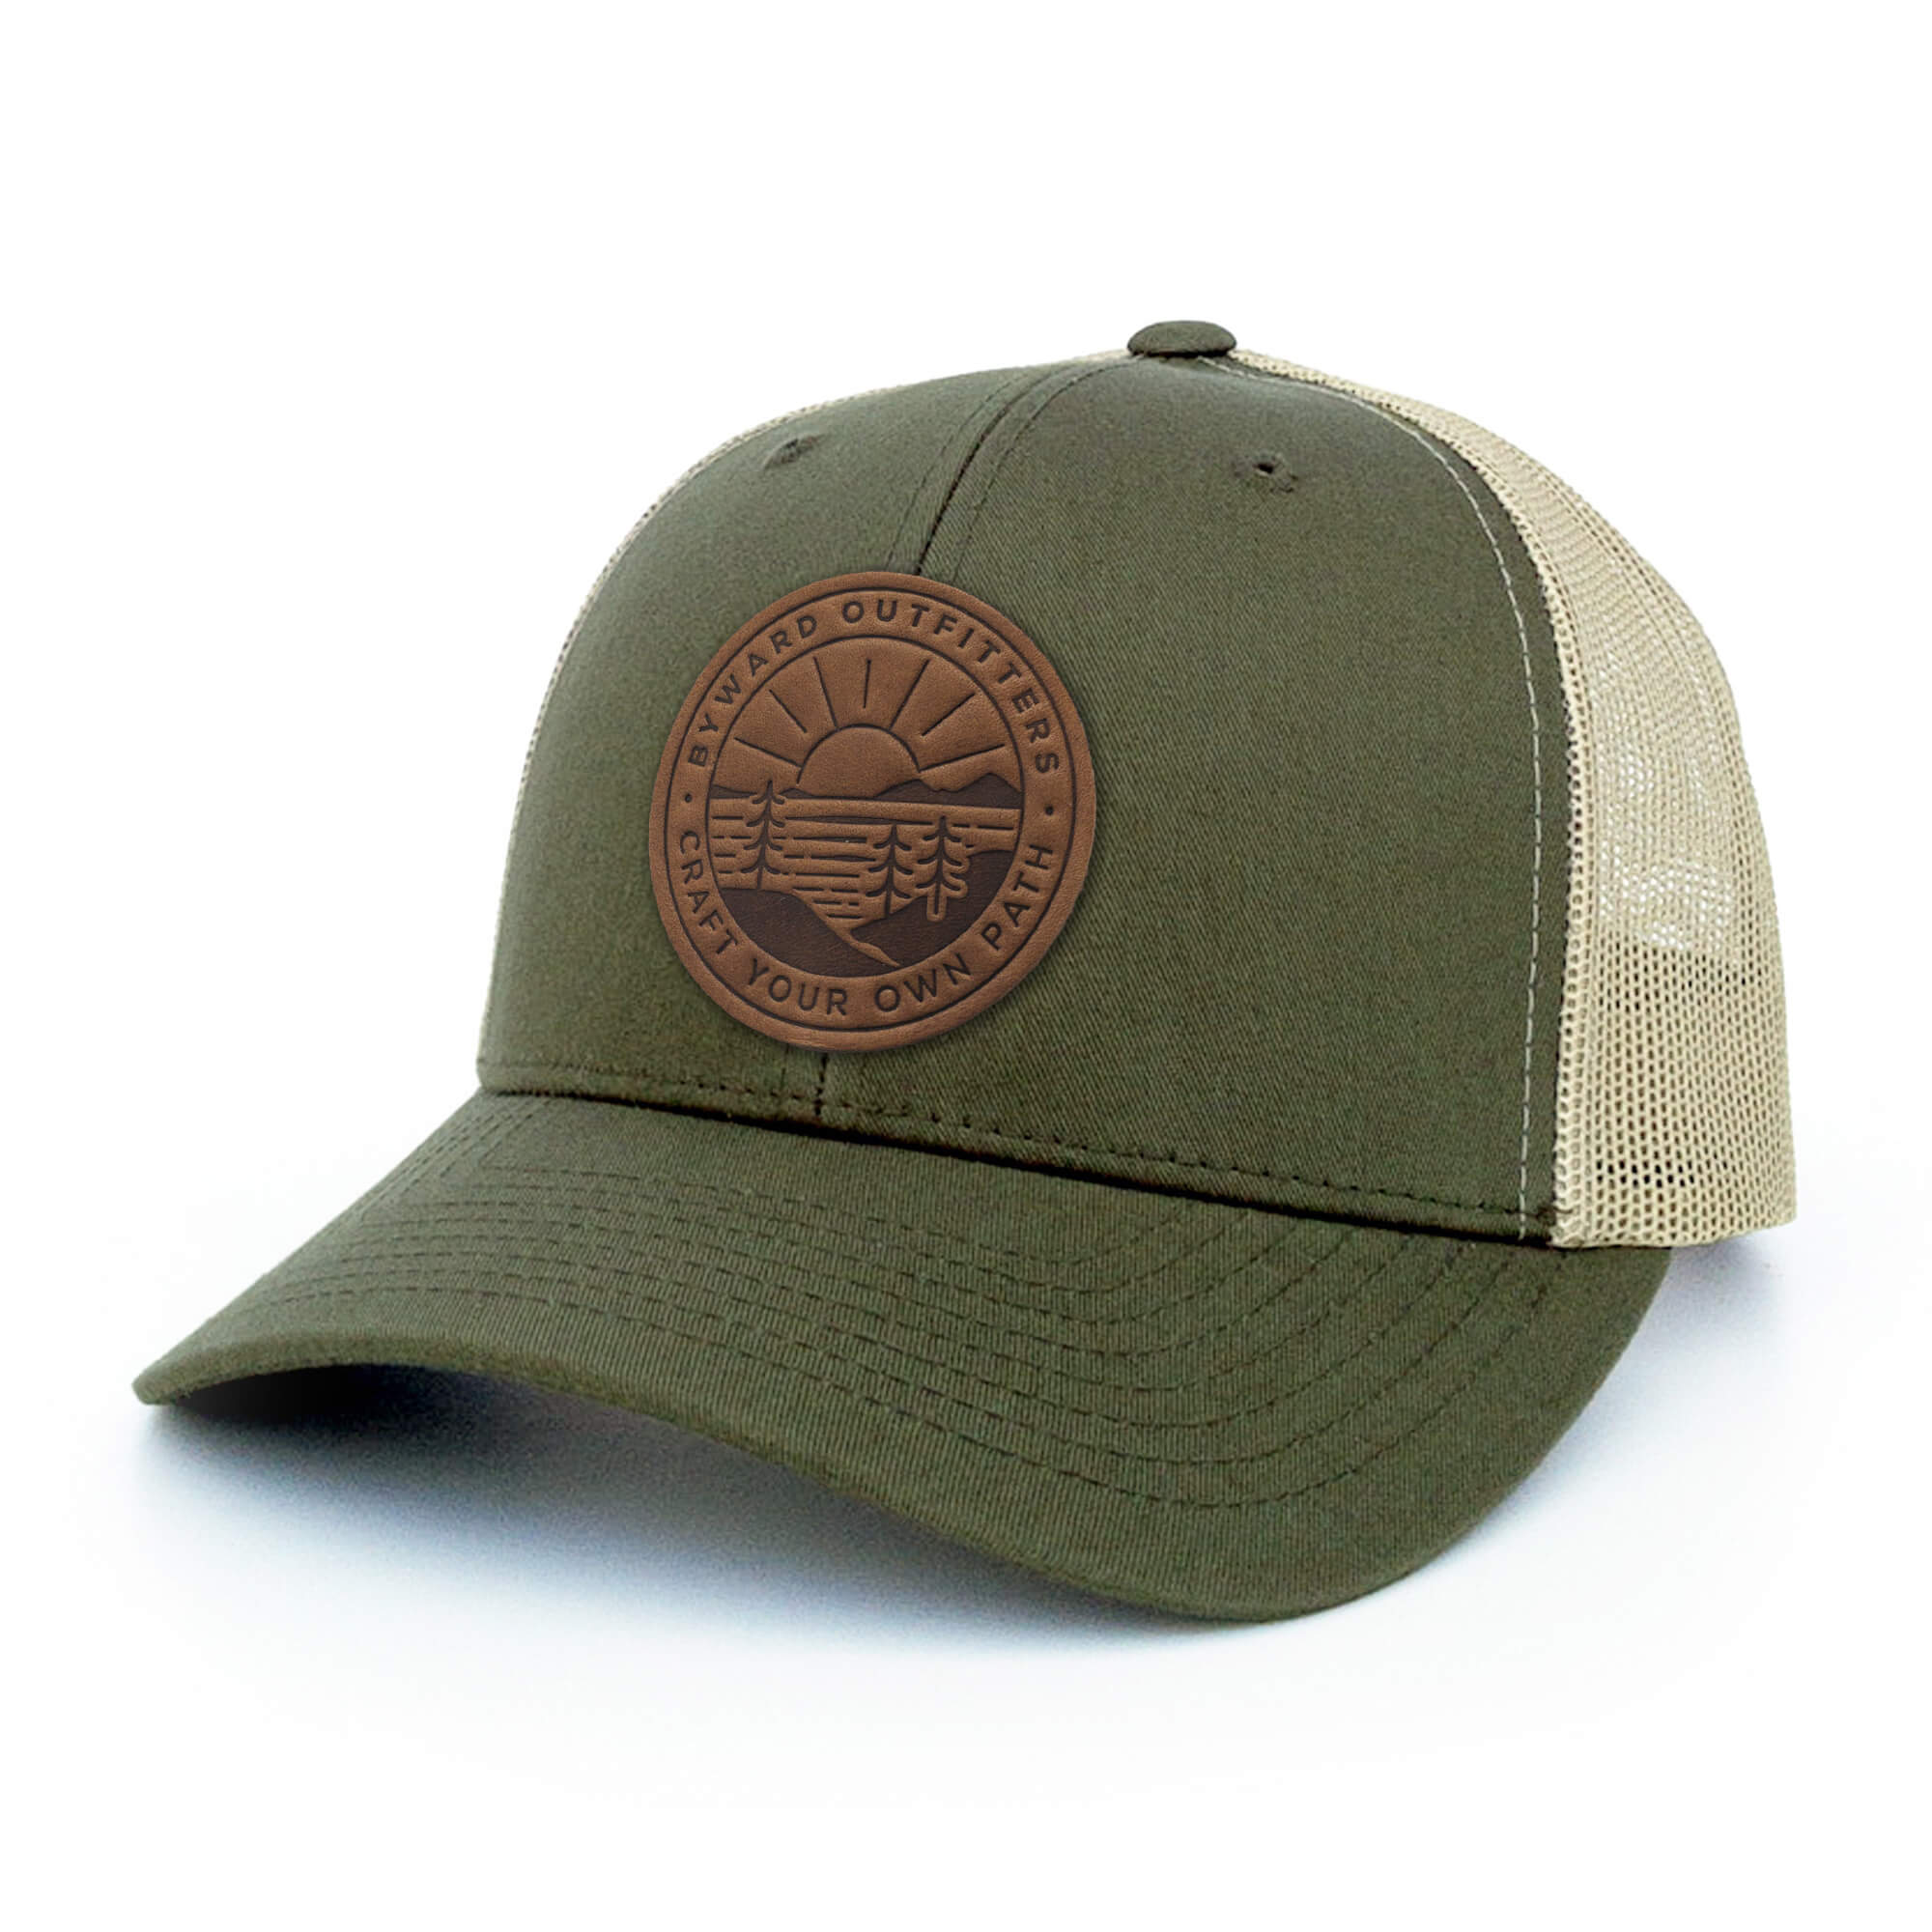 Moss Green and khaki trucker hat with full-grain leather patch of Scenic Sunrise | BLACK-005-002, CHARC-005-002, NAVY-005-002, HGREY-005-002, MOSS-005-002, BROWN-005-002